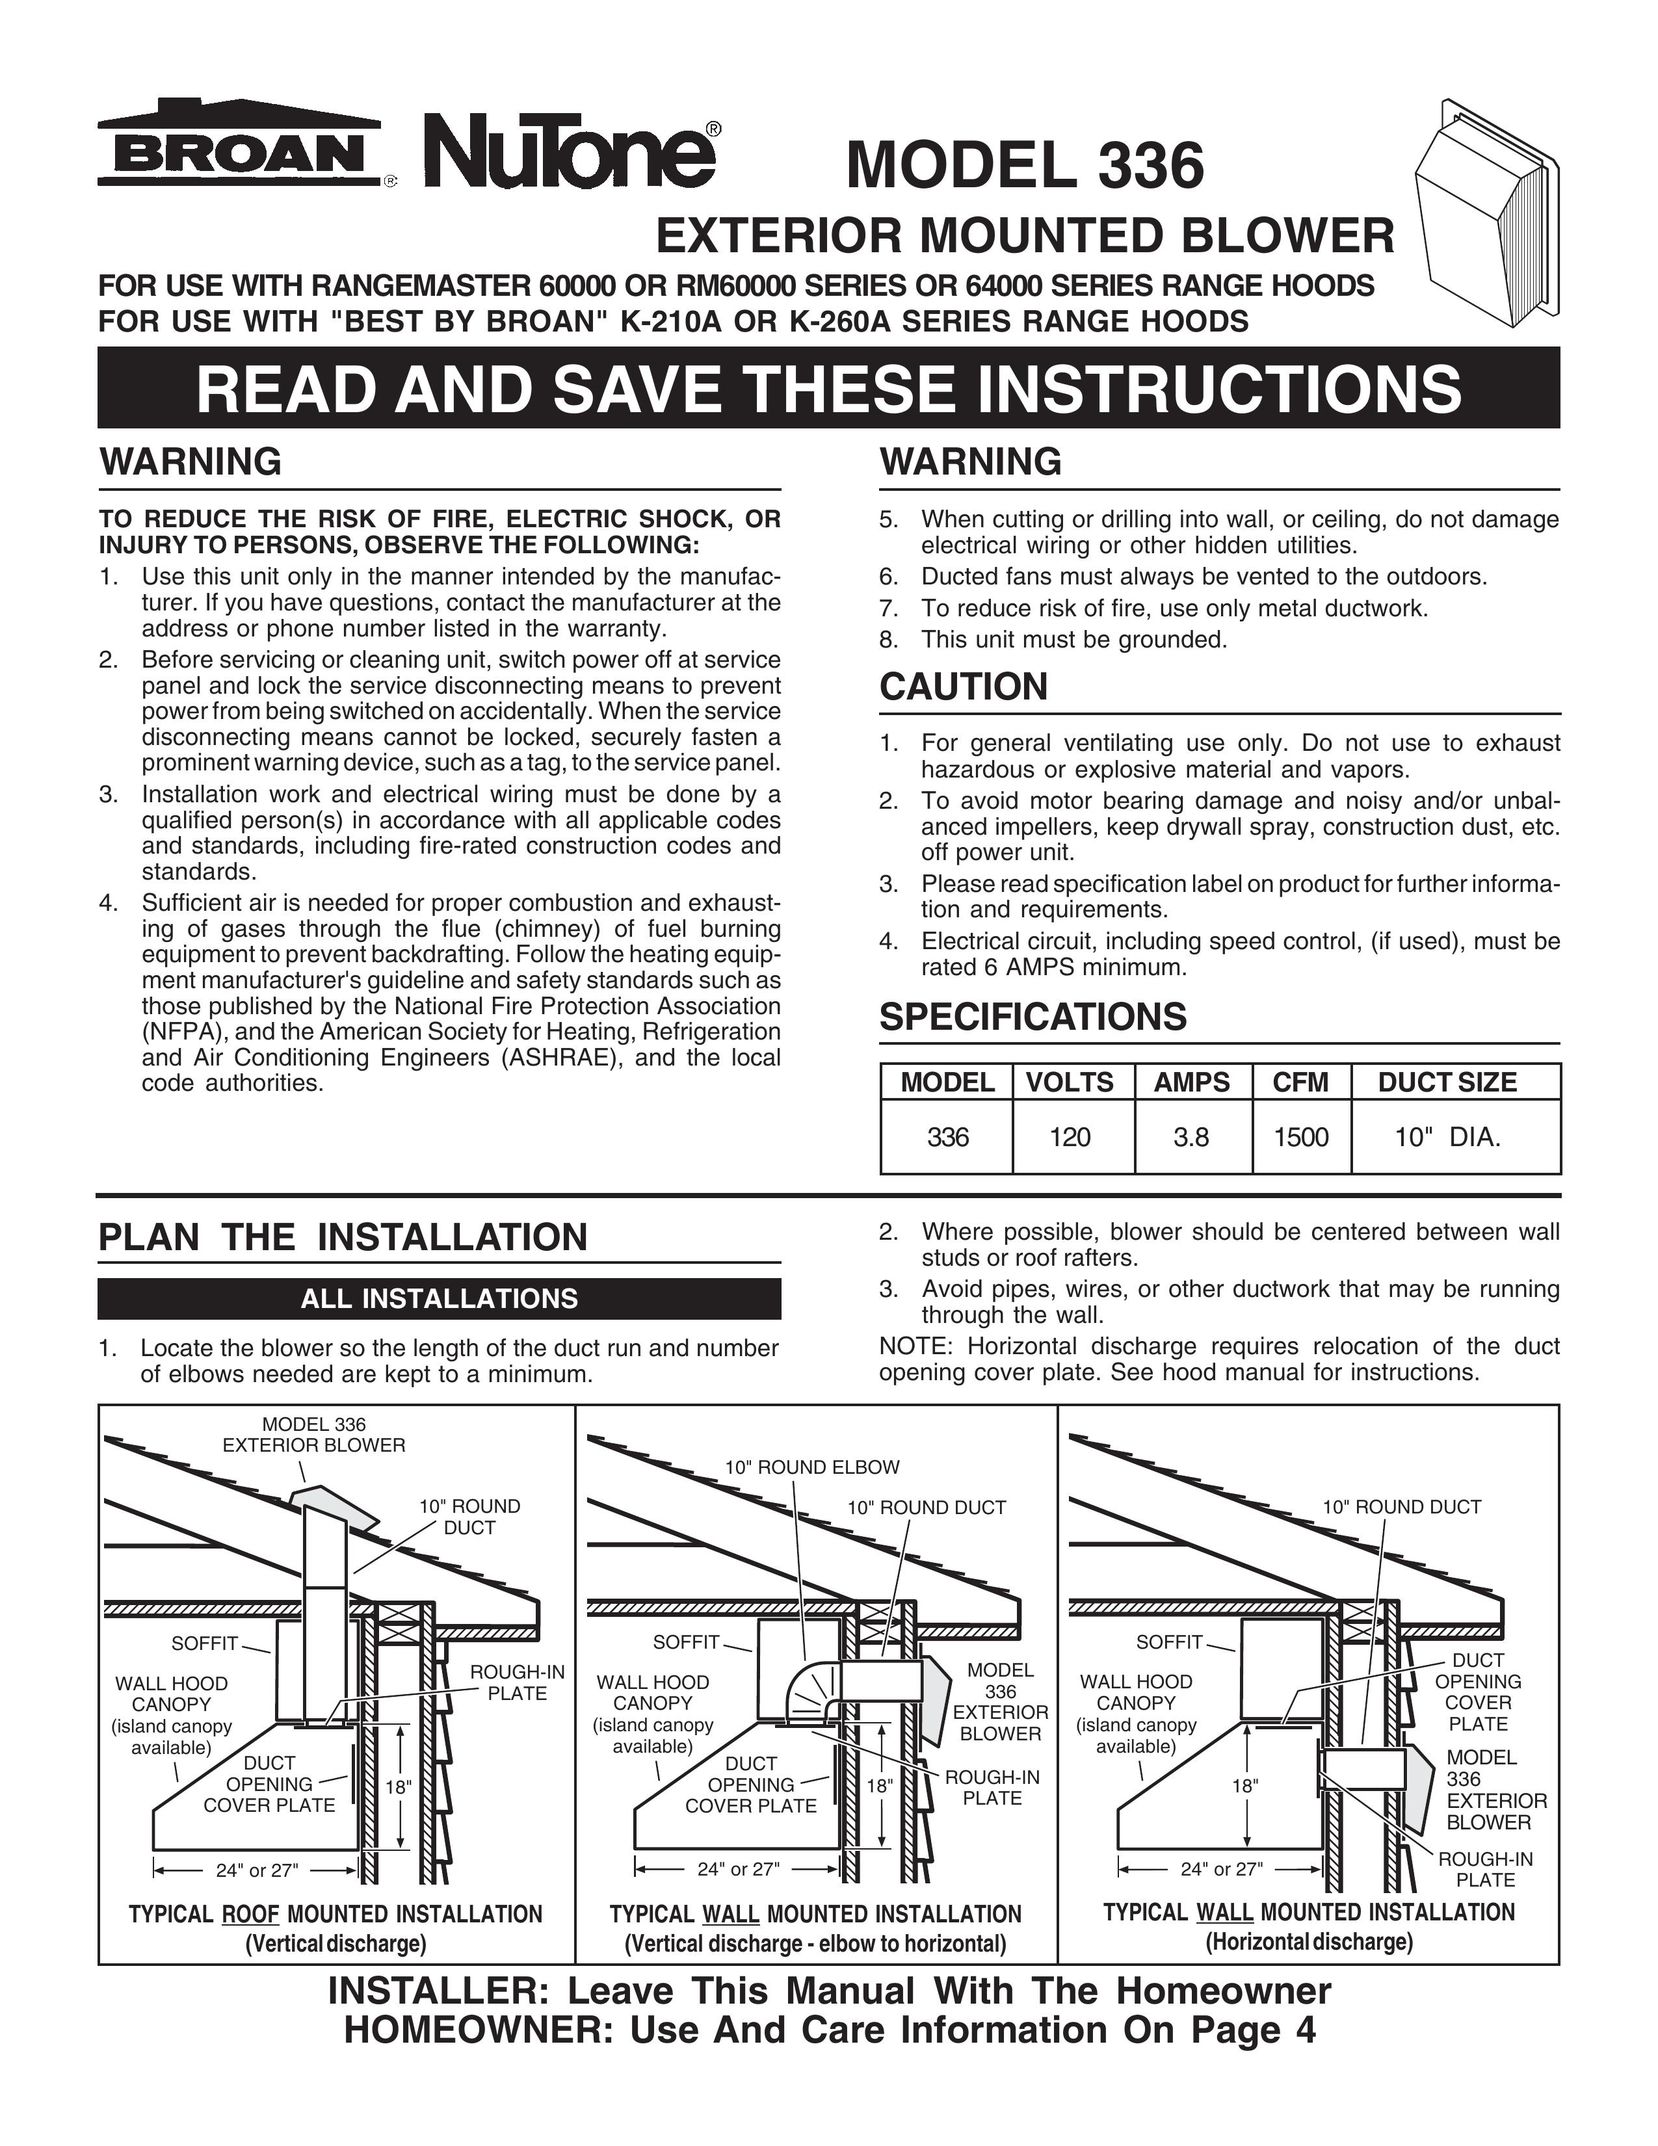 Broan MODEL 336 Bicycle Accessories User Manual (Page 1)